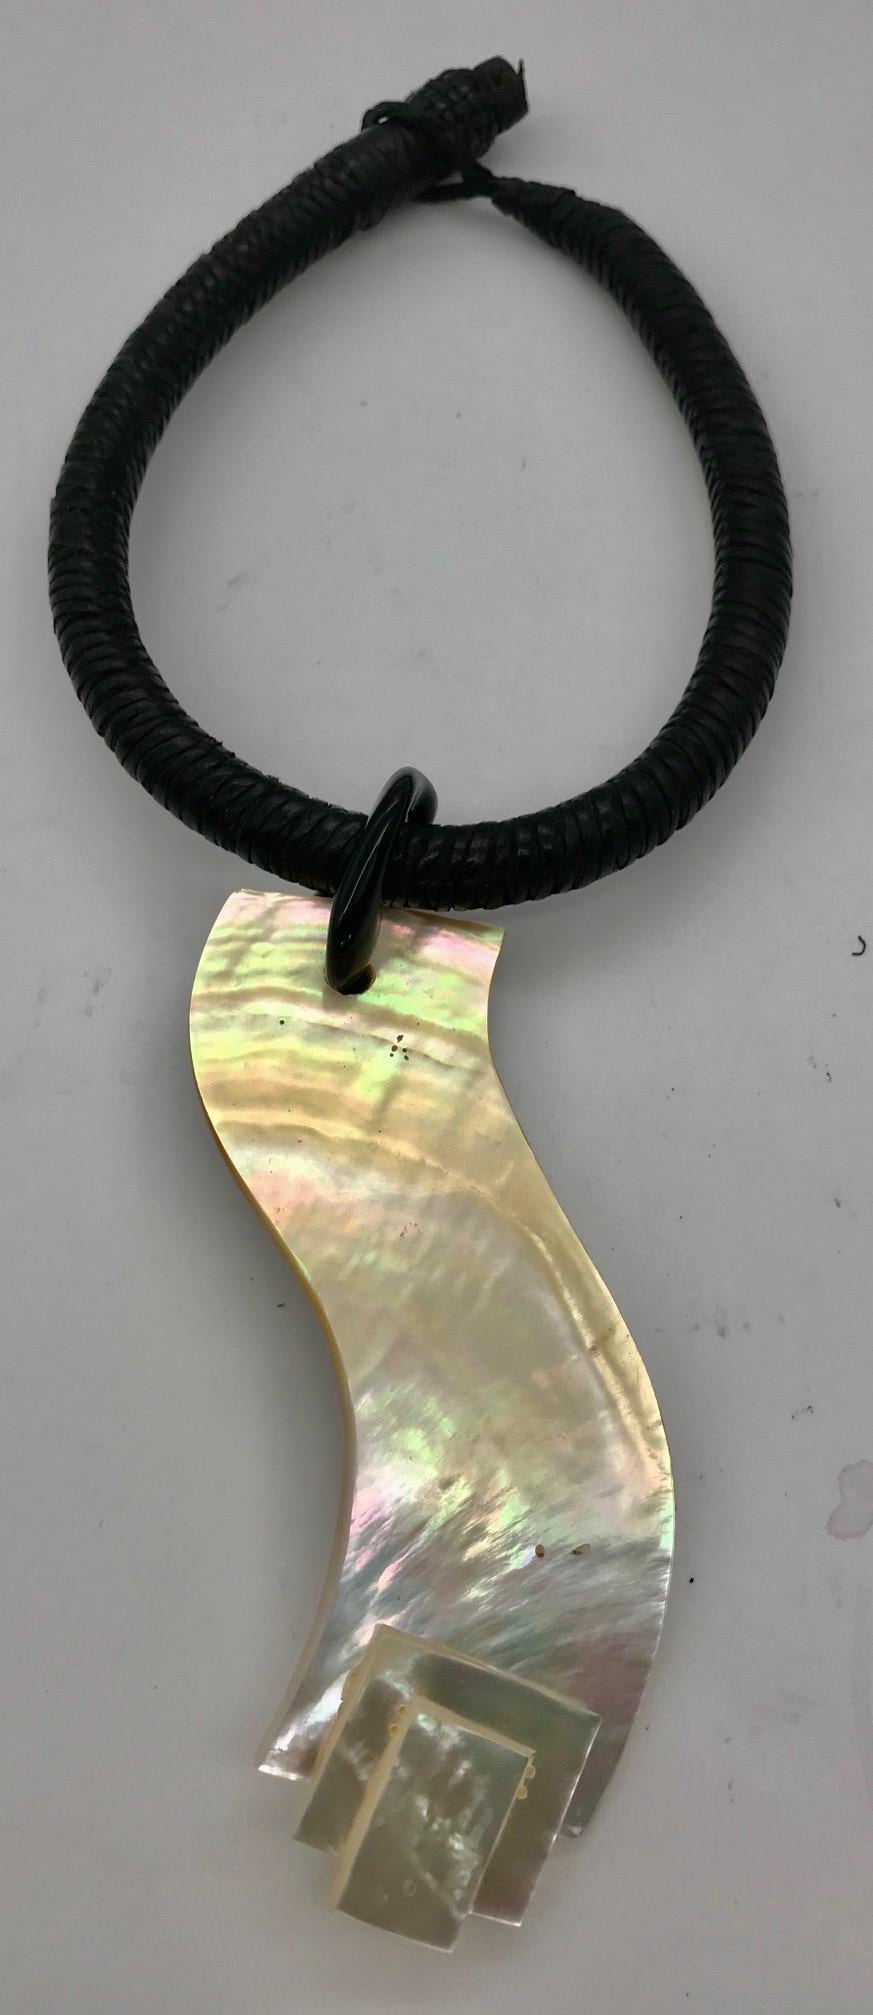 Mother of Pearl Pendant ,organic /architectural shape, with French Deco enhancer hung on a woven leather African necklace.White mother of pearl is called Pinctada Maxima and it can be seen in Photo Gallery.	.
 Nacreous oysters create a pearl, which